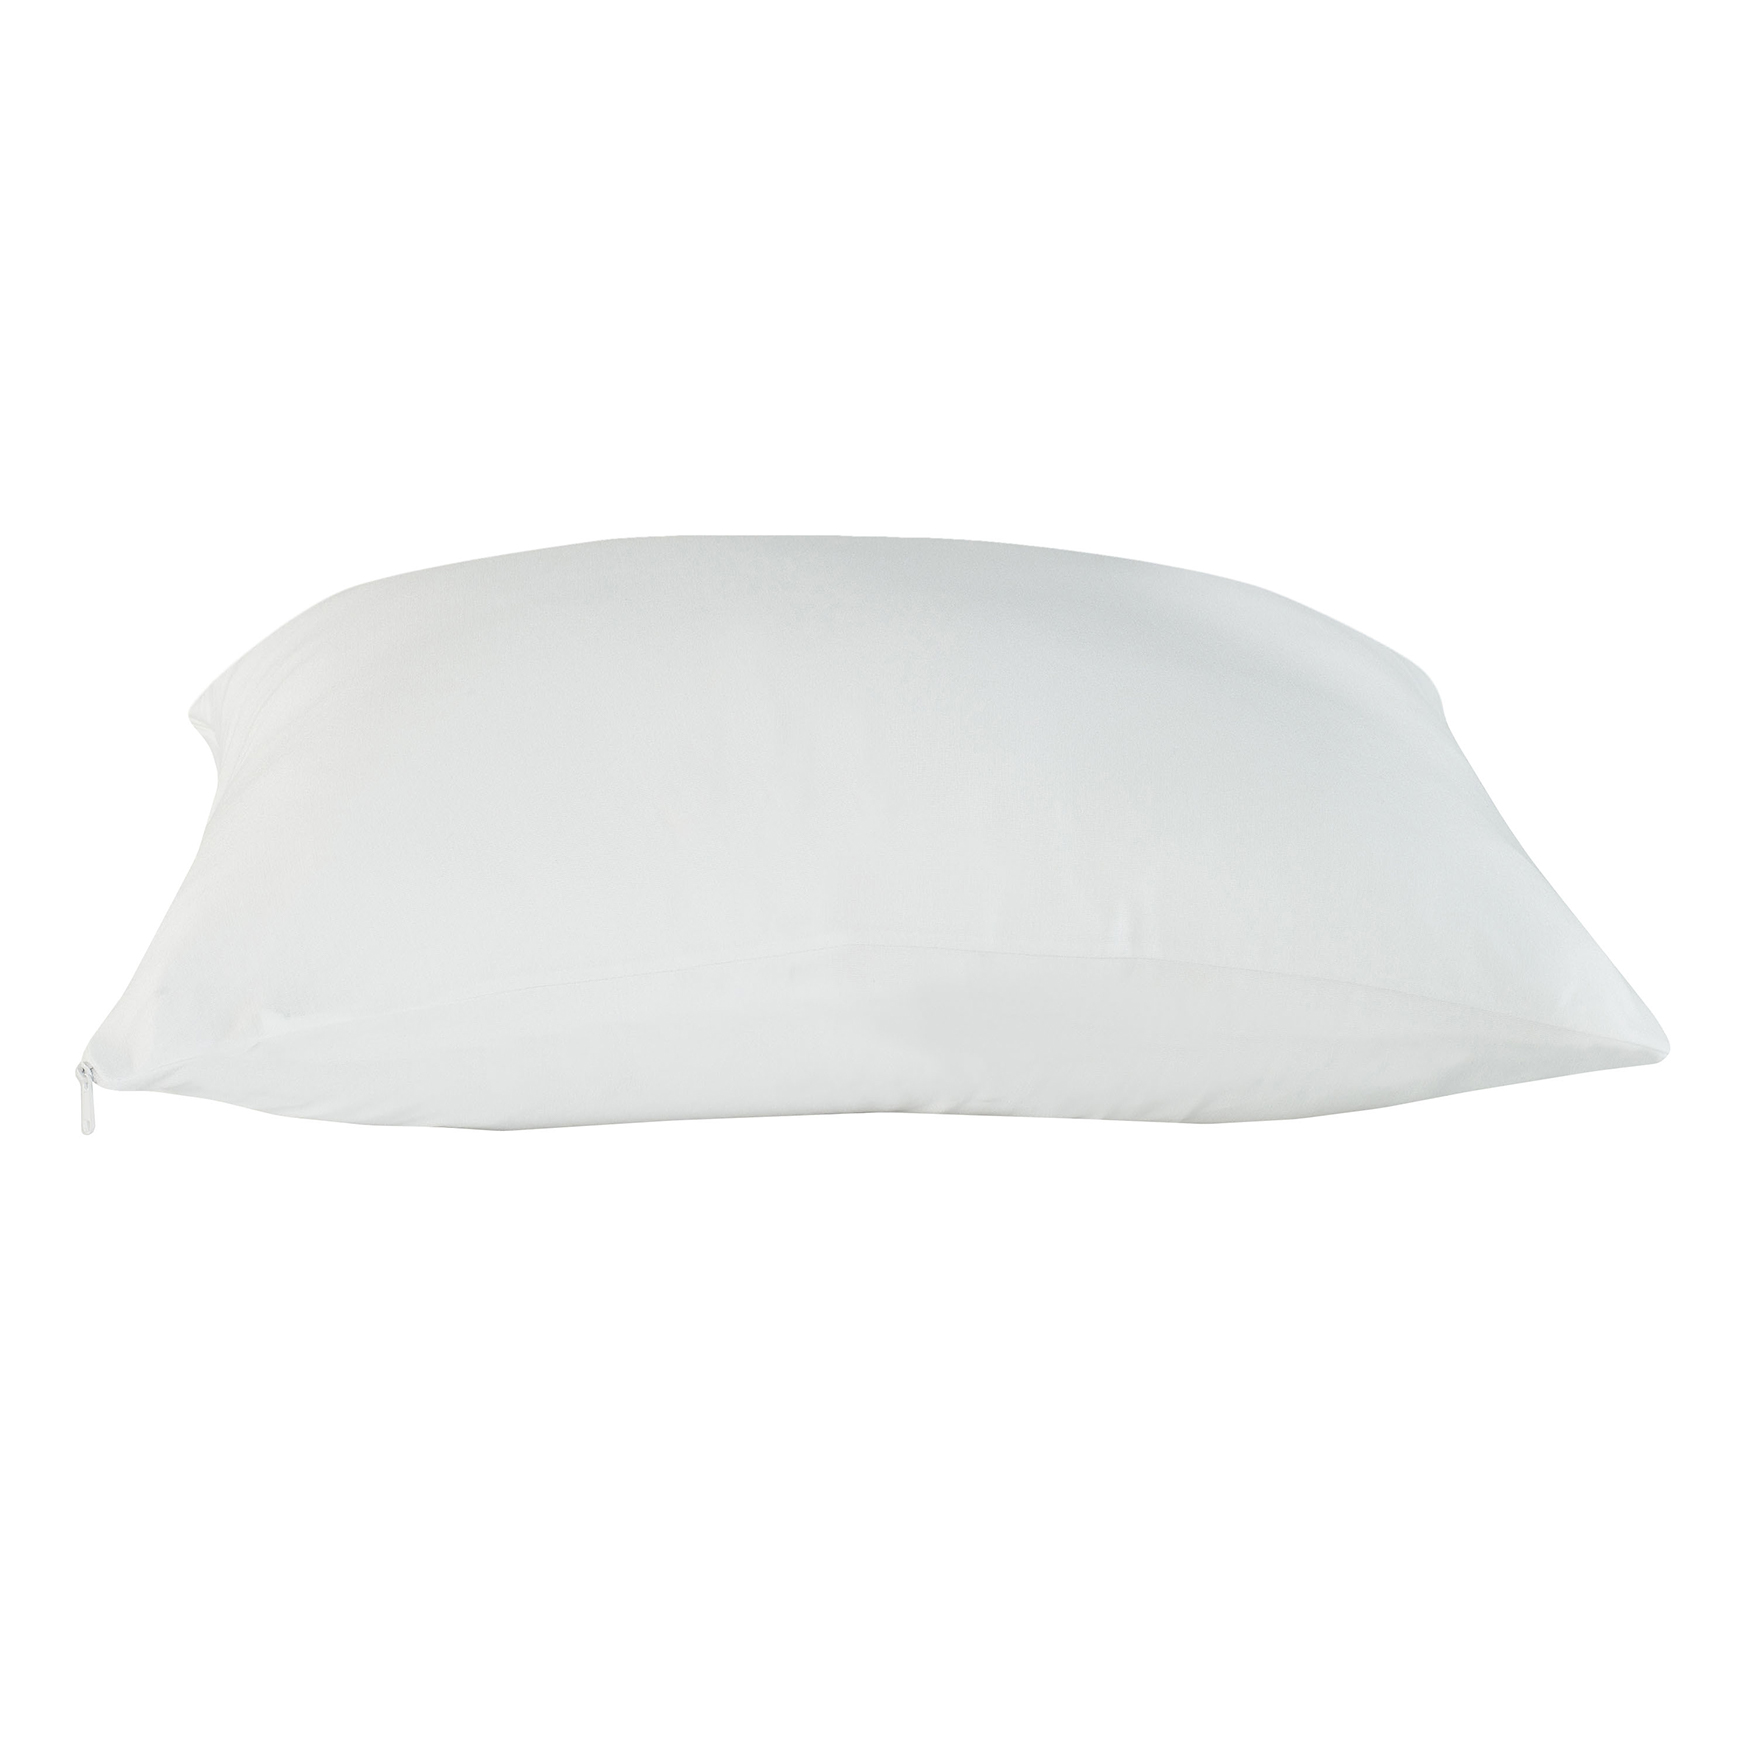 All-In-One Cooling Bamboo Pillow Protector 2-Pack, Standard/Queen, 